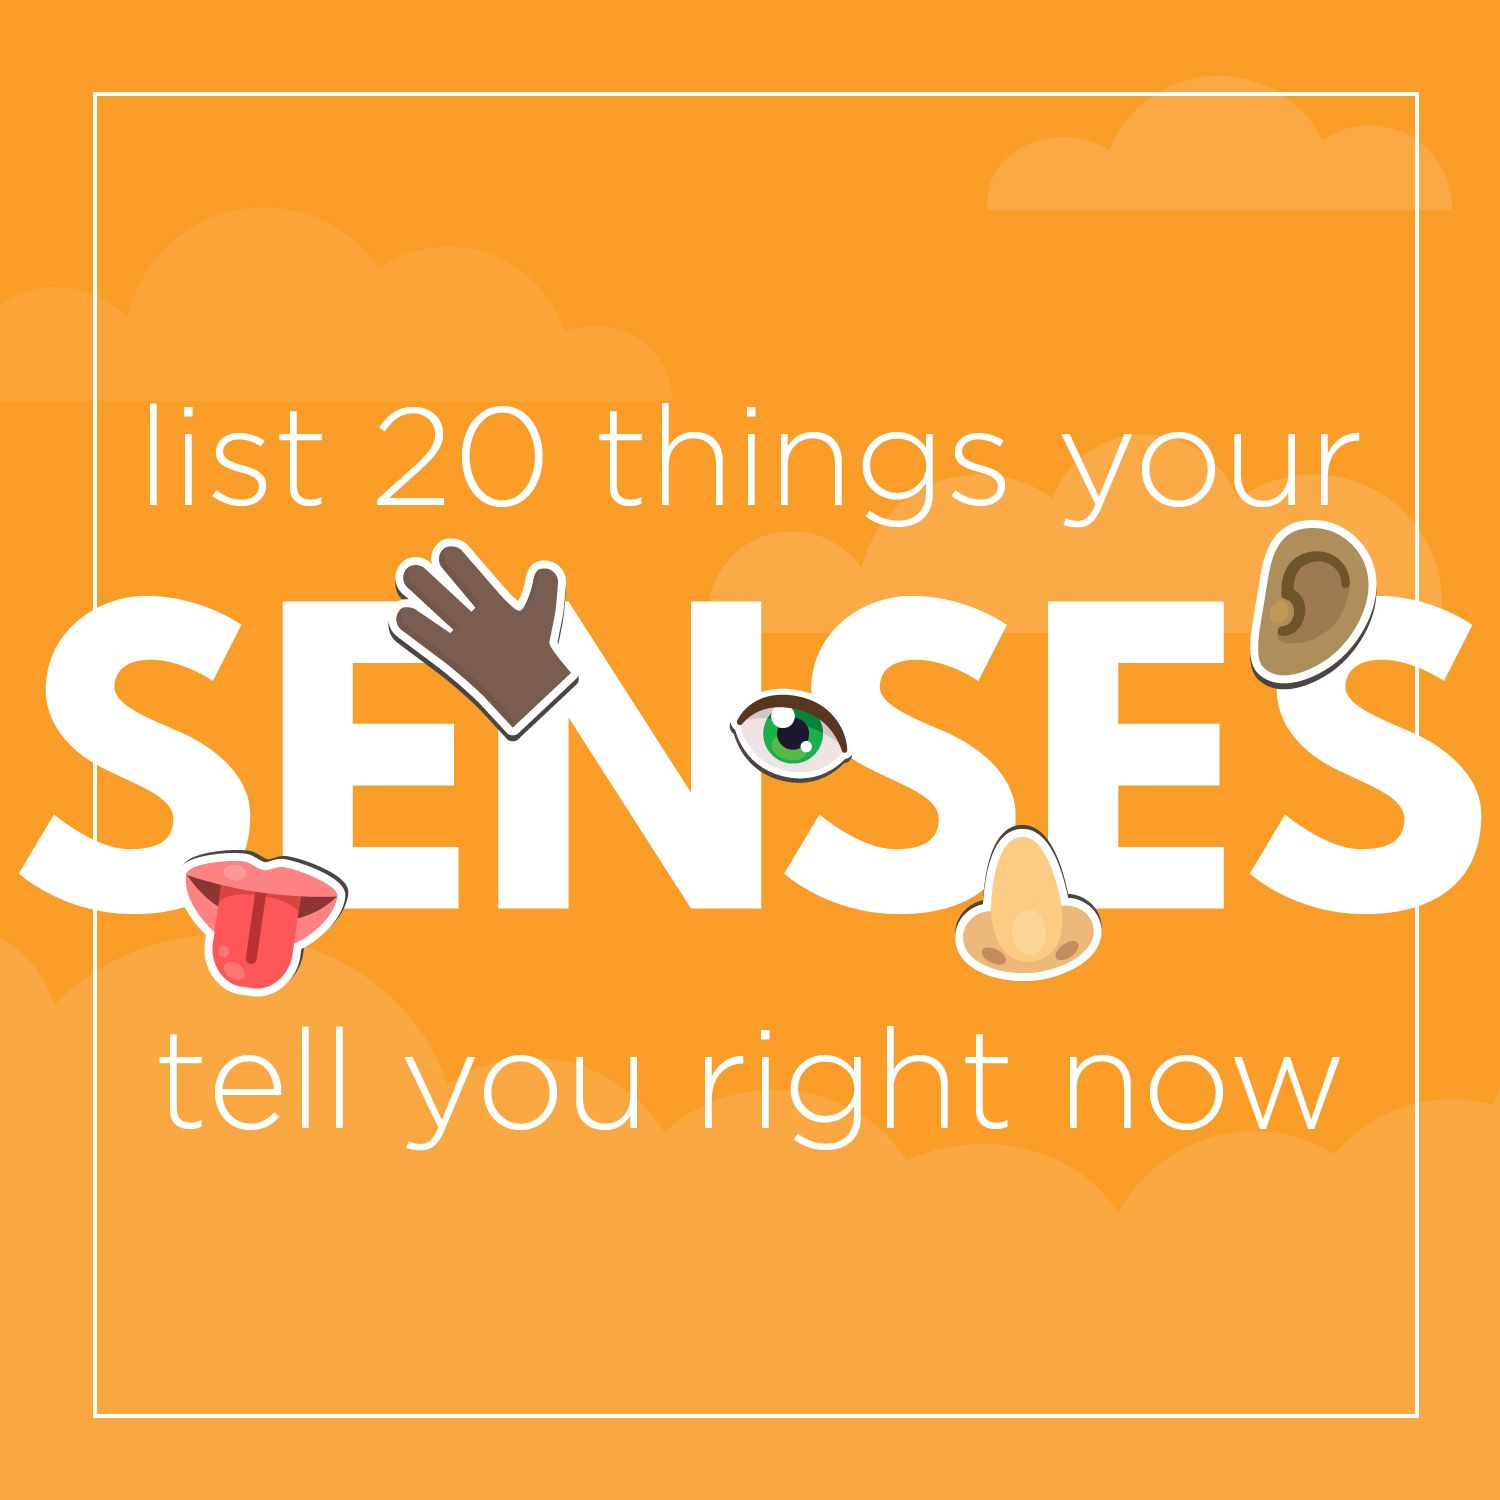 List 20 things your senses tell you right now